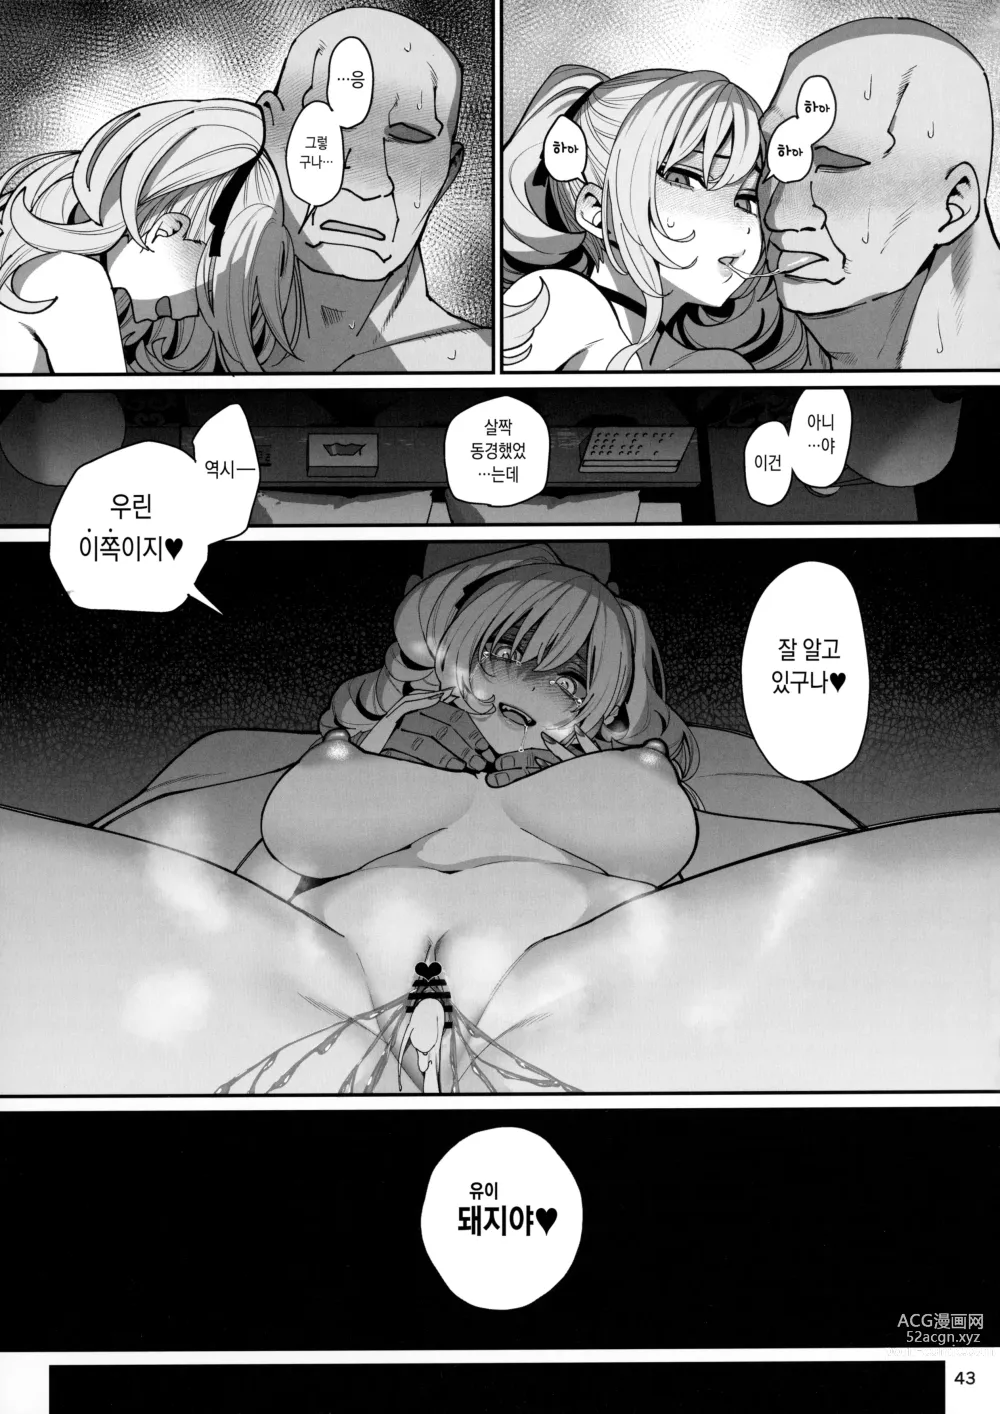 Page 44 of doujinshi 여친 최면2